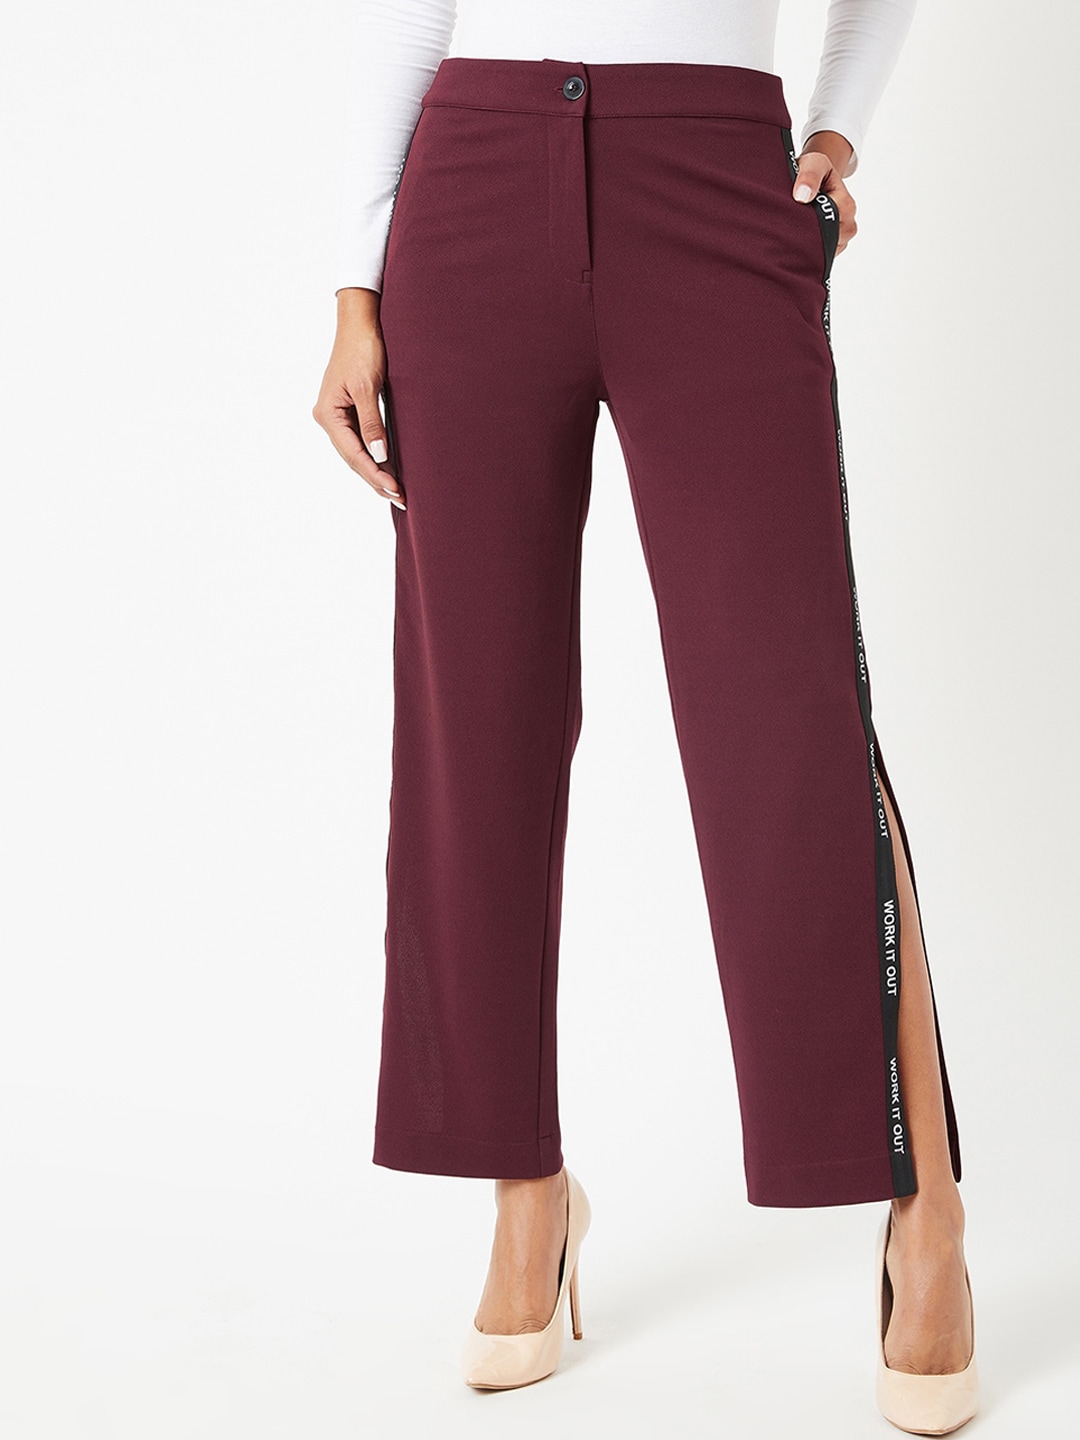 The Roadster Lifestyle Co High Waist Slitted Trouser Price in India